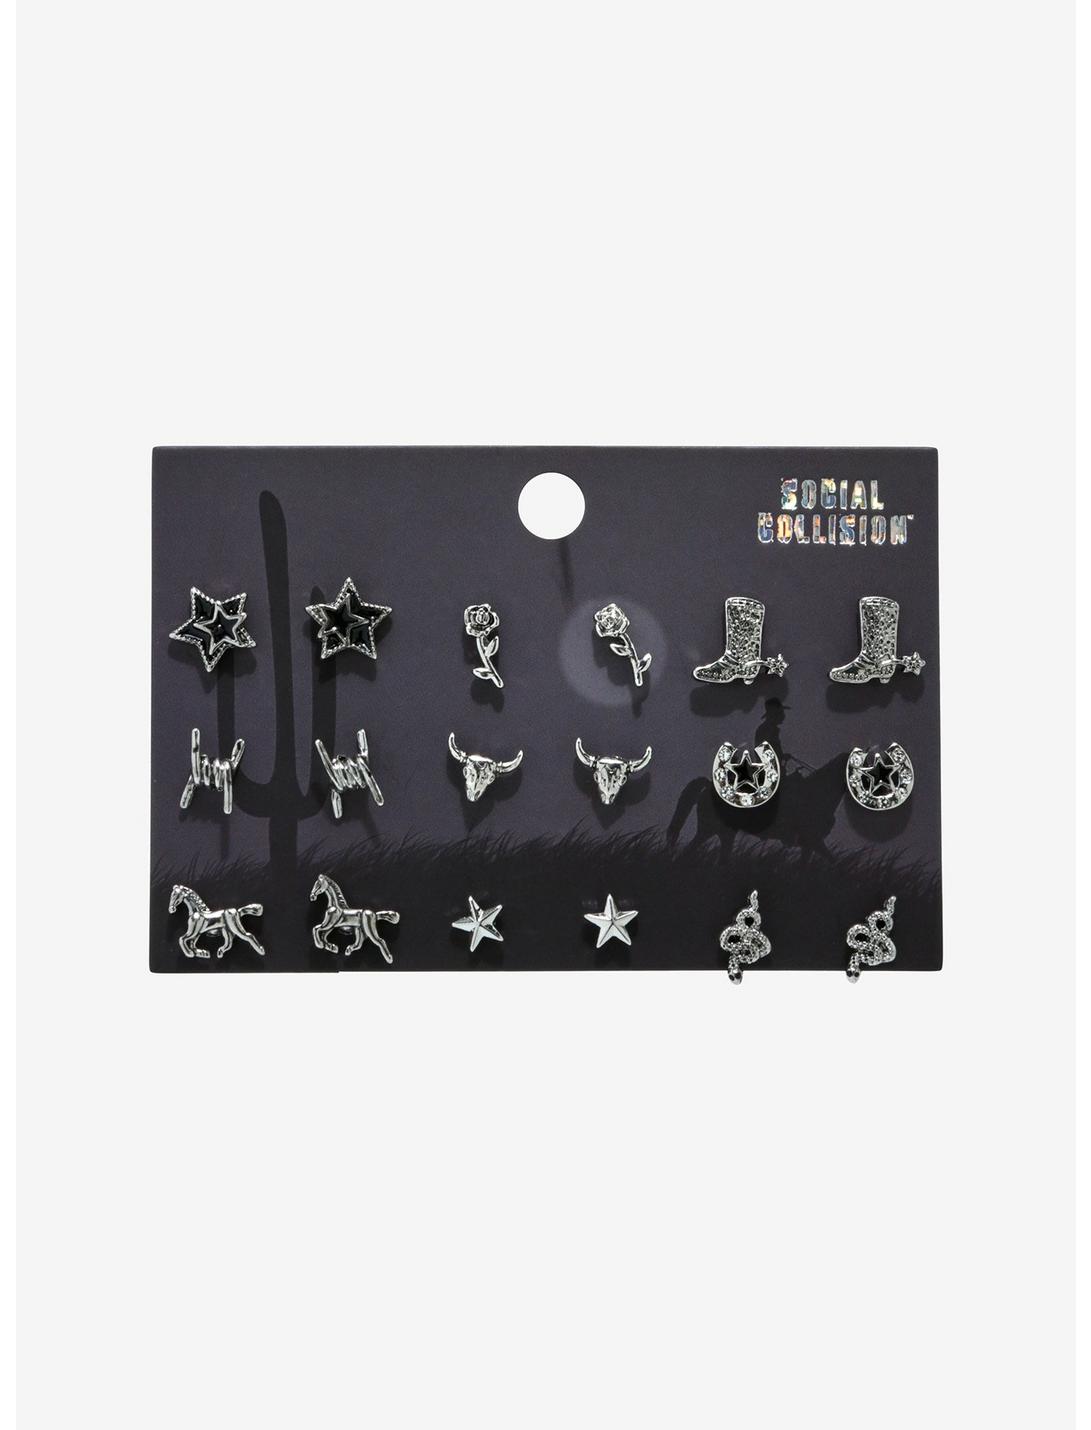 Social Collision Western Cowgirl Earring Set, , hi-res